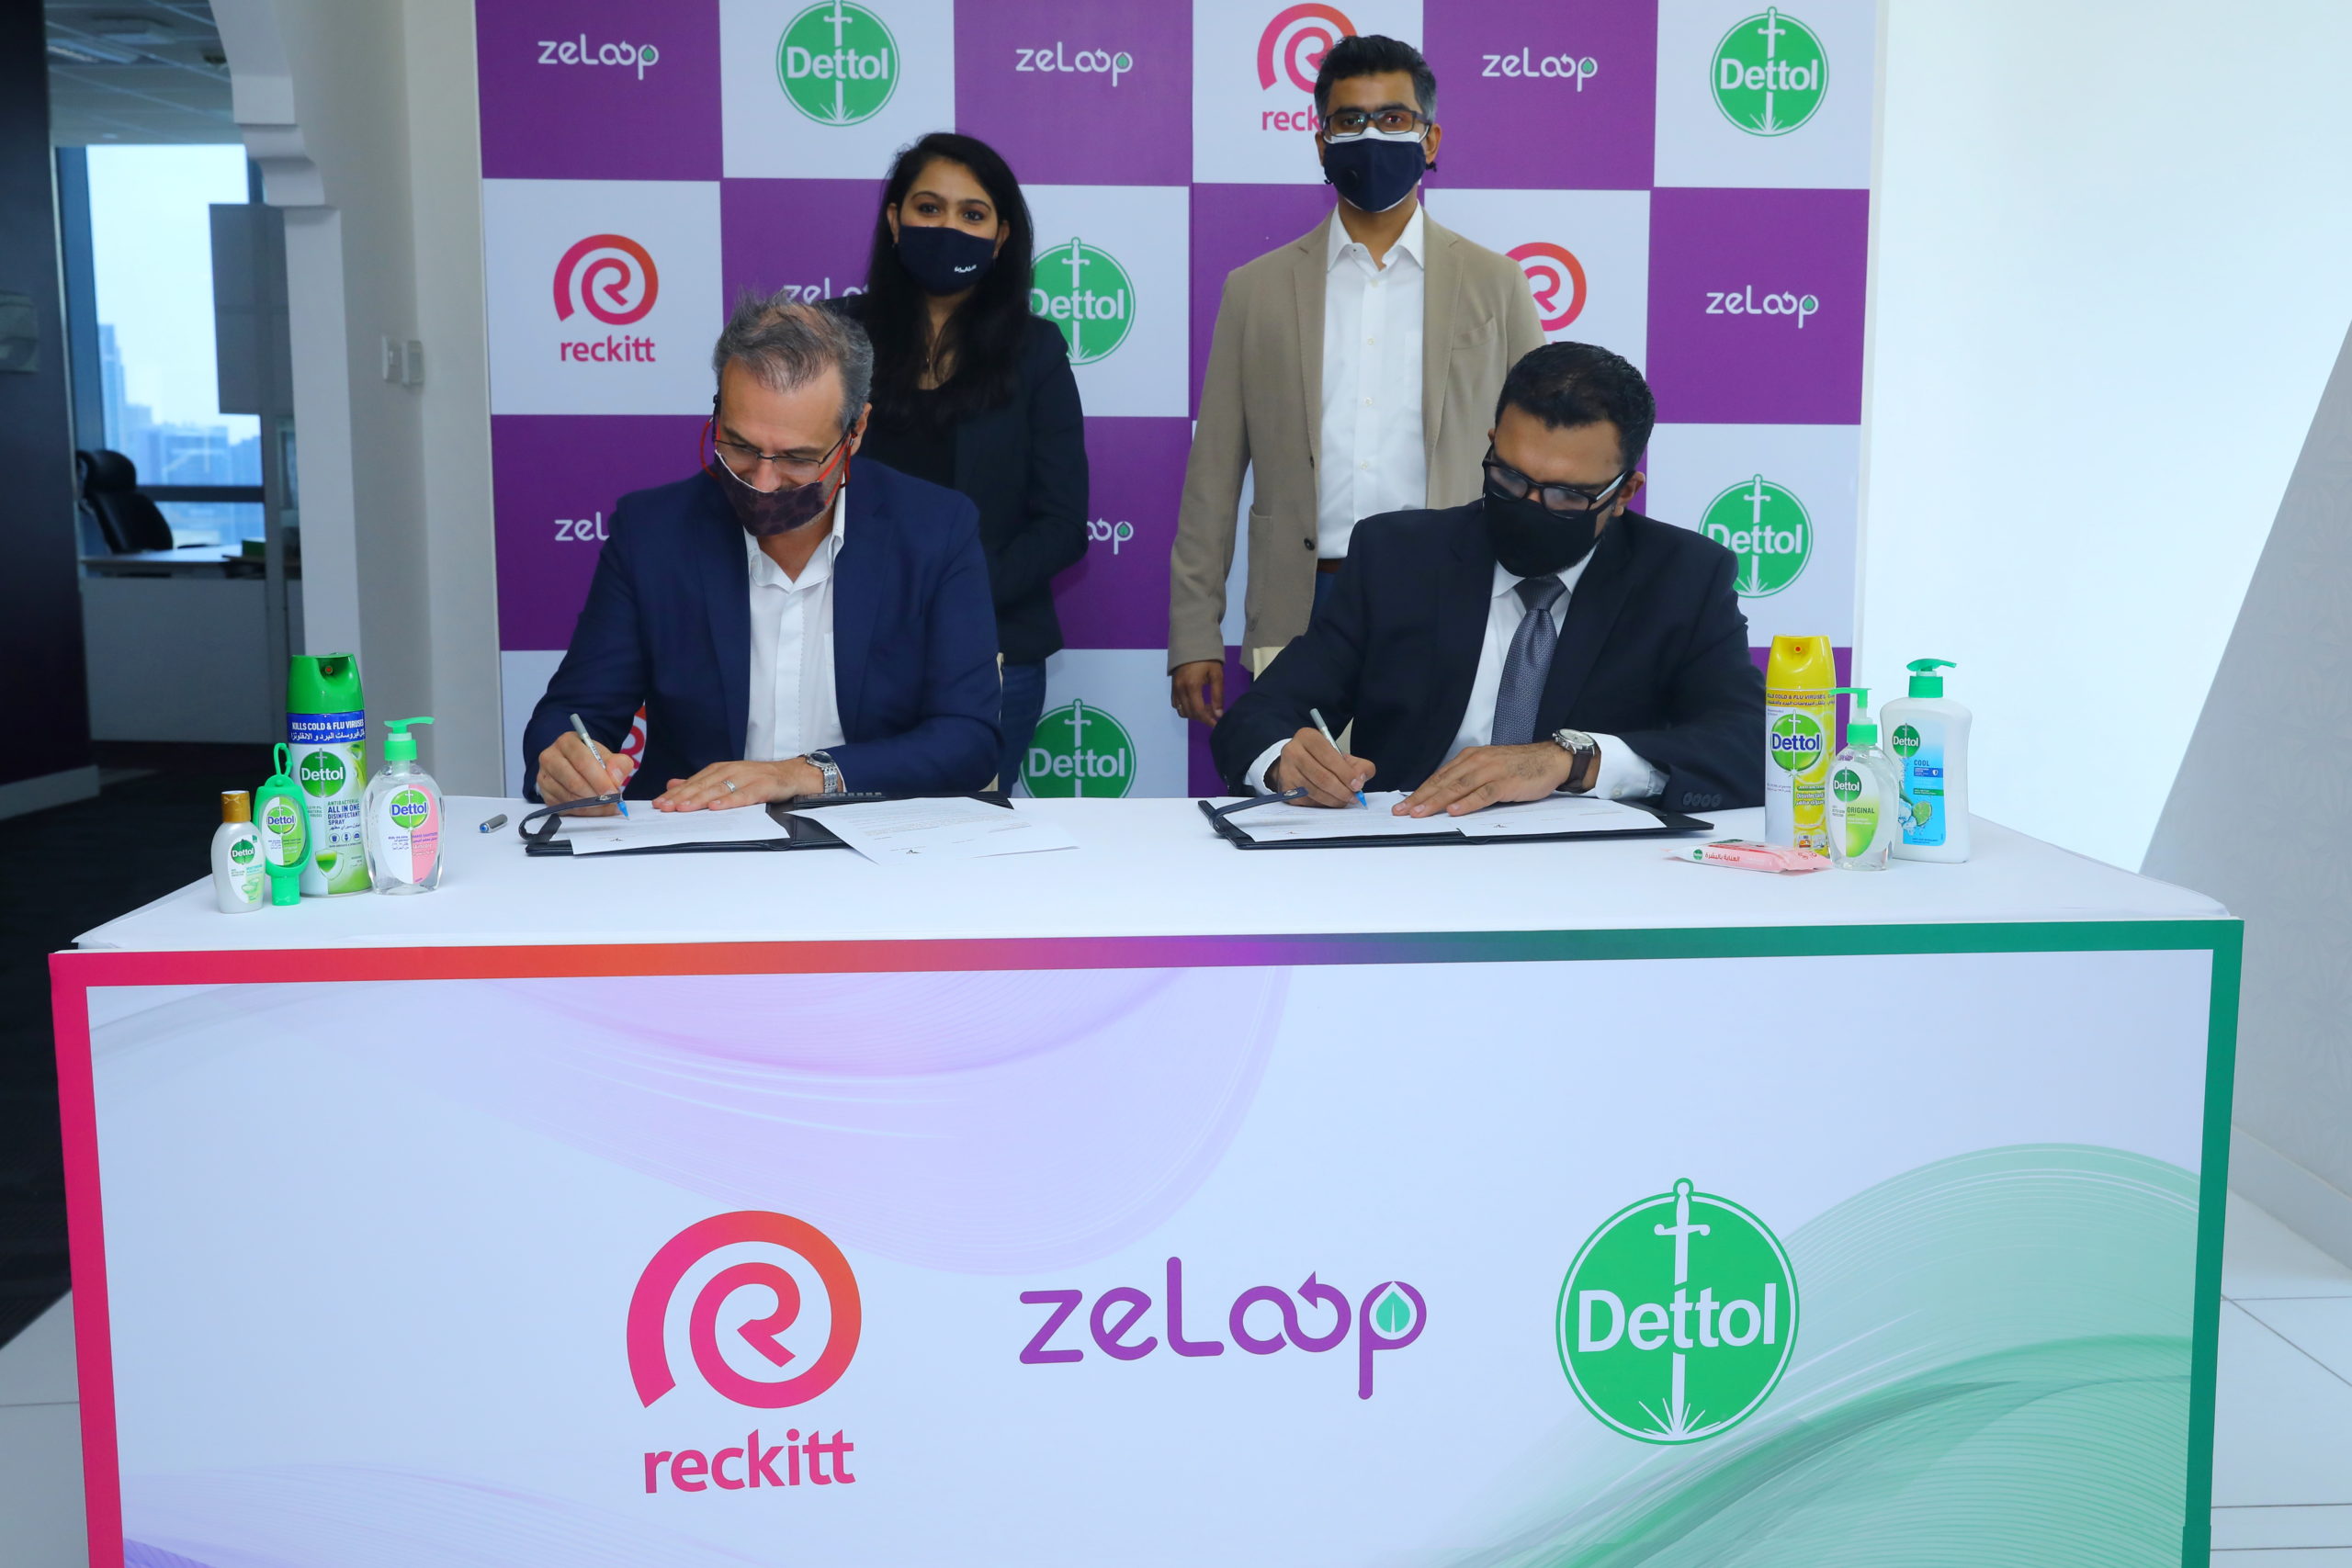 Image for Dettol, Dubai-Based Startup Zeloop Partner To Accelerate Recycling In The UAE